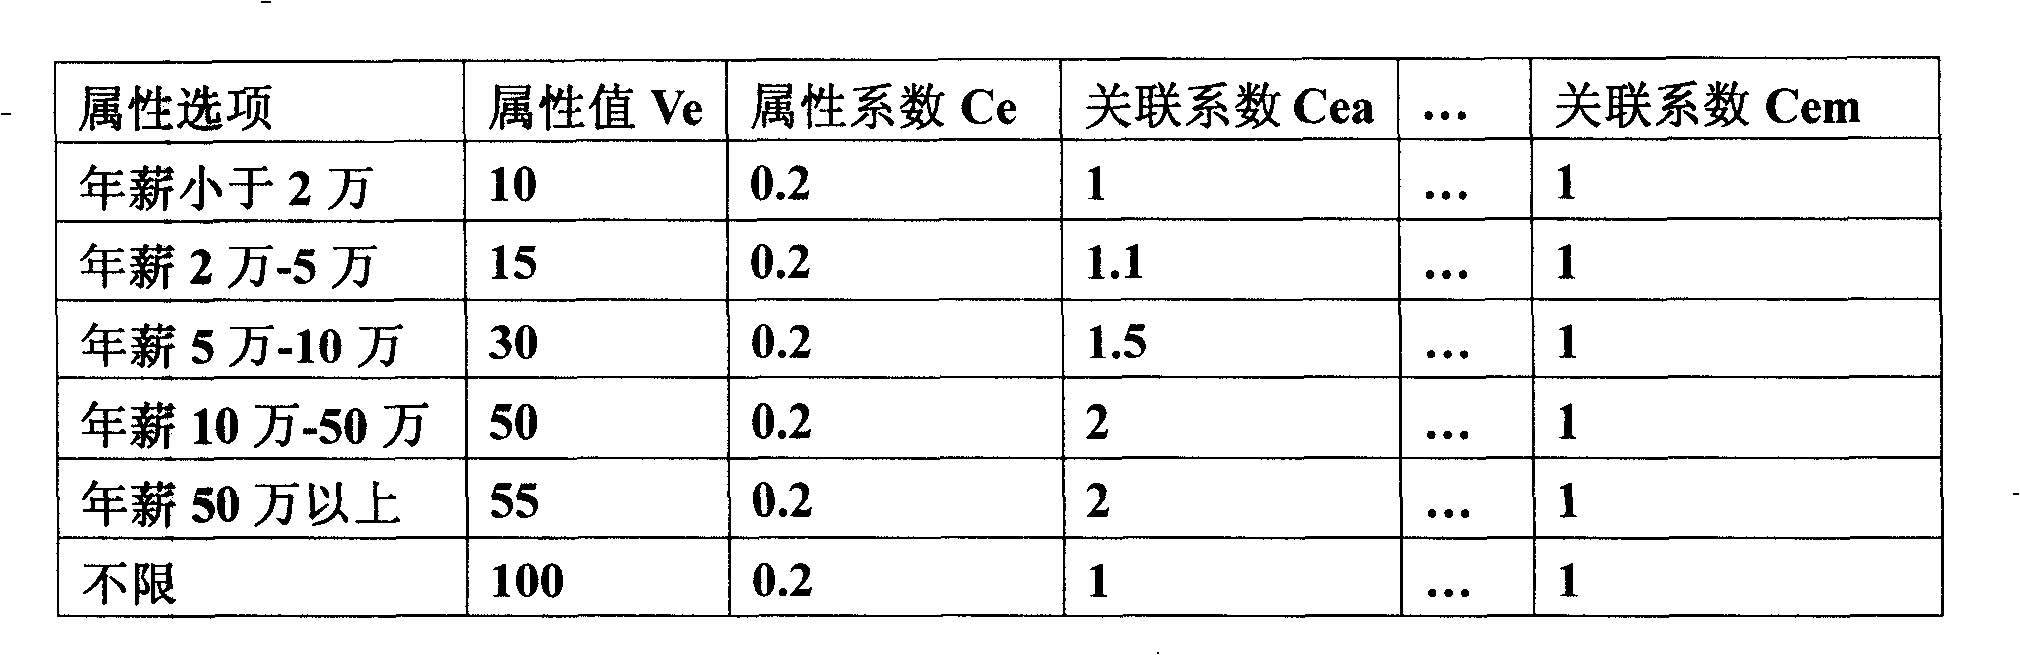 Method for automatically computing network advertisement grade and displaying advertisement